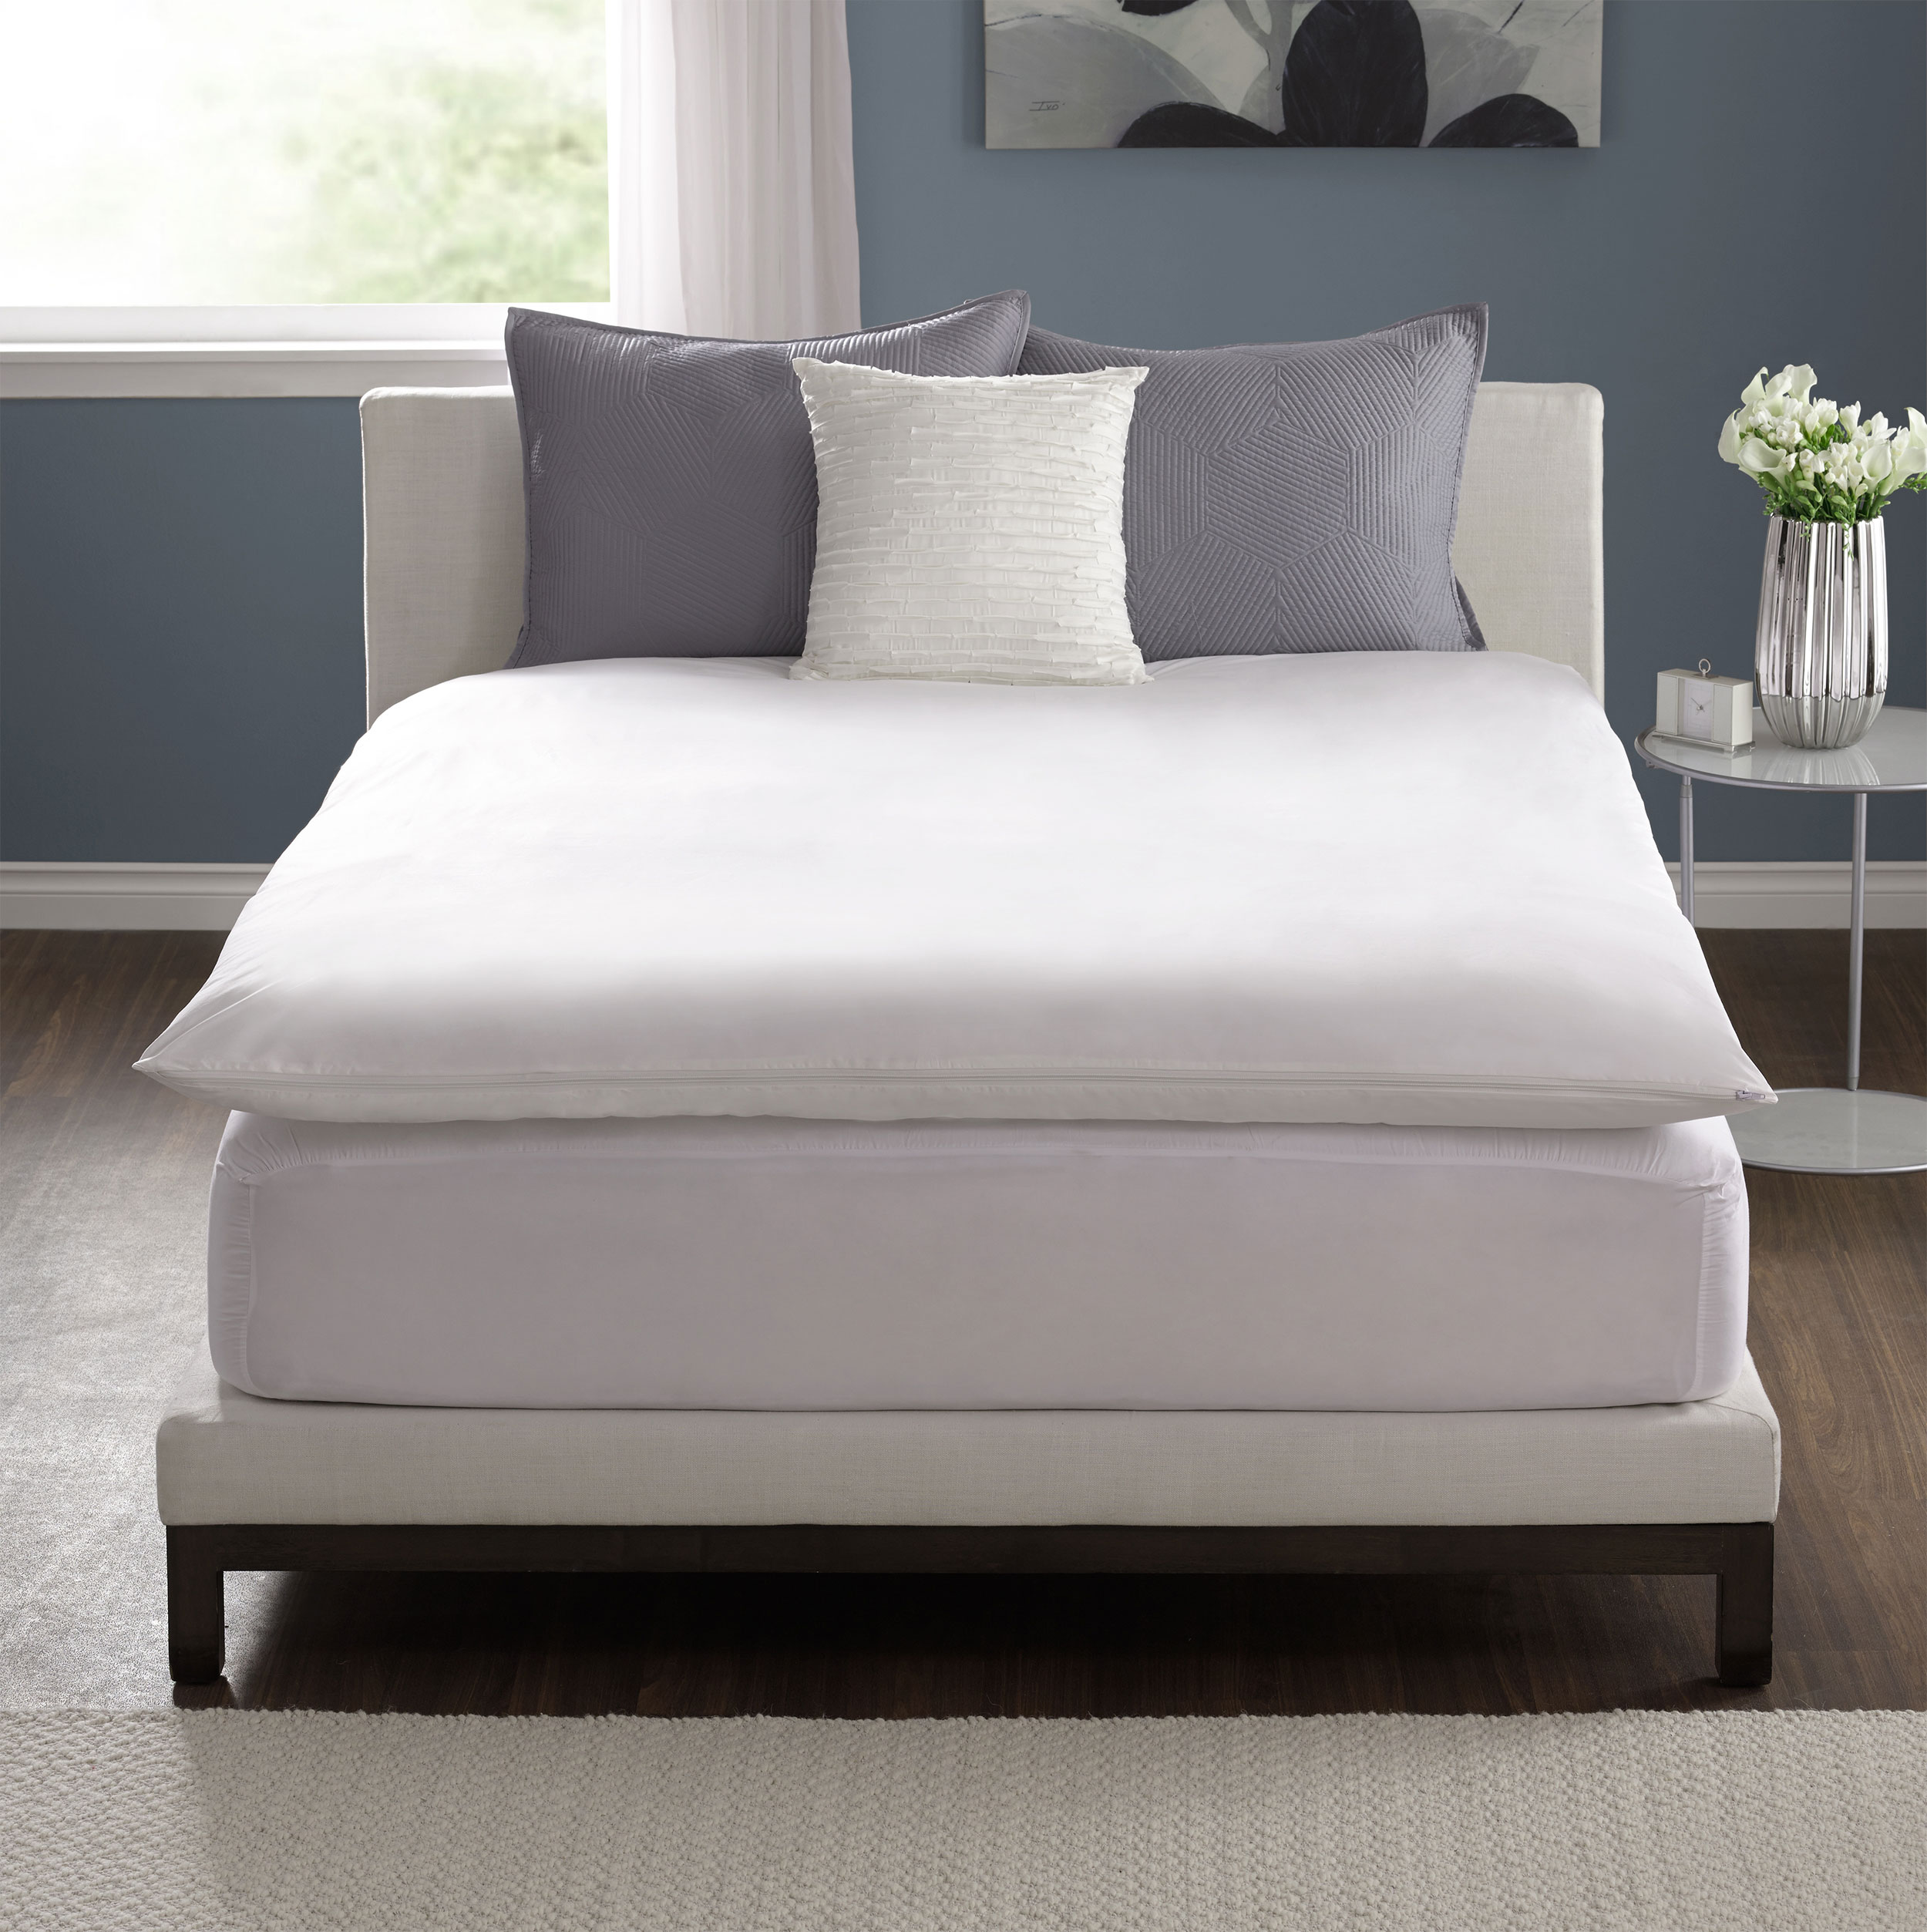 Pacific Coast Basic Mattress Topper Protector 230 Thread Count Machine Wash & Dry - Queen